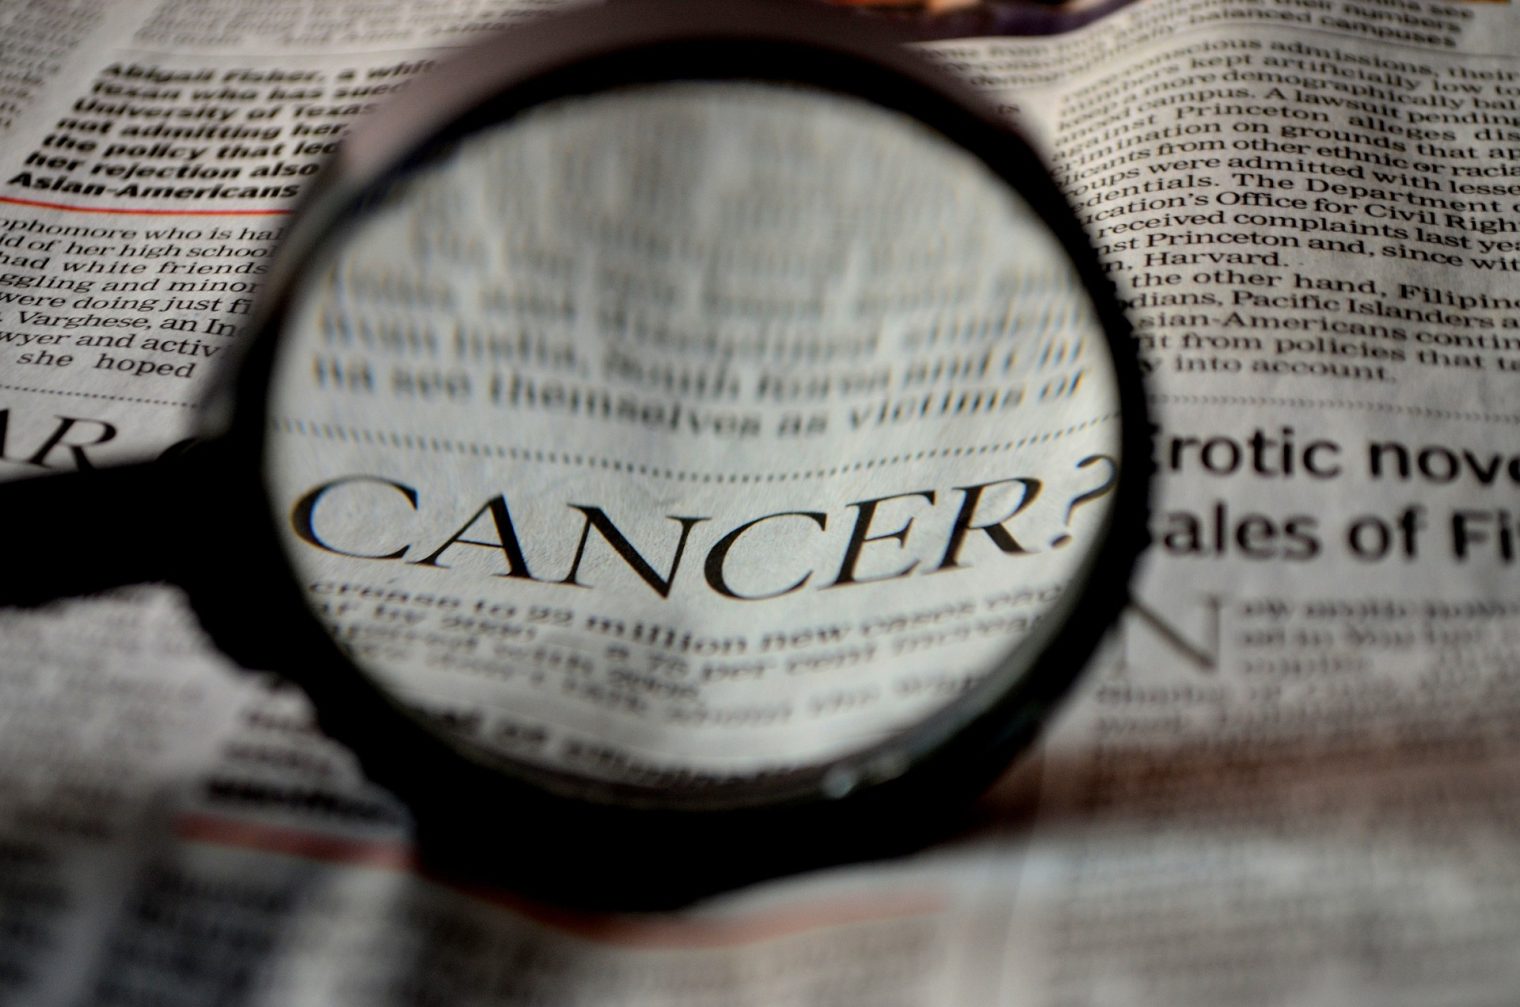 does cannabis cure cancer?